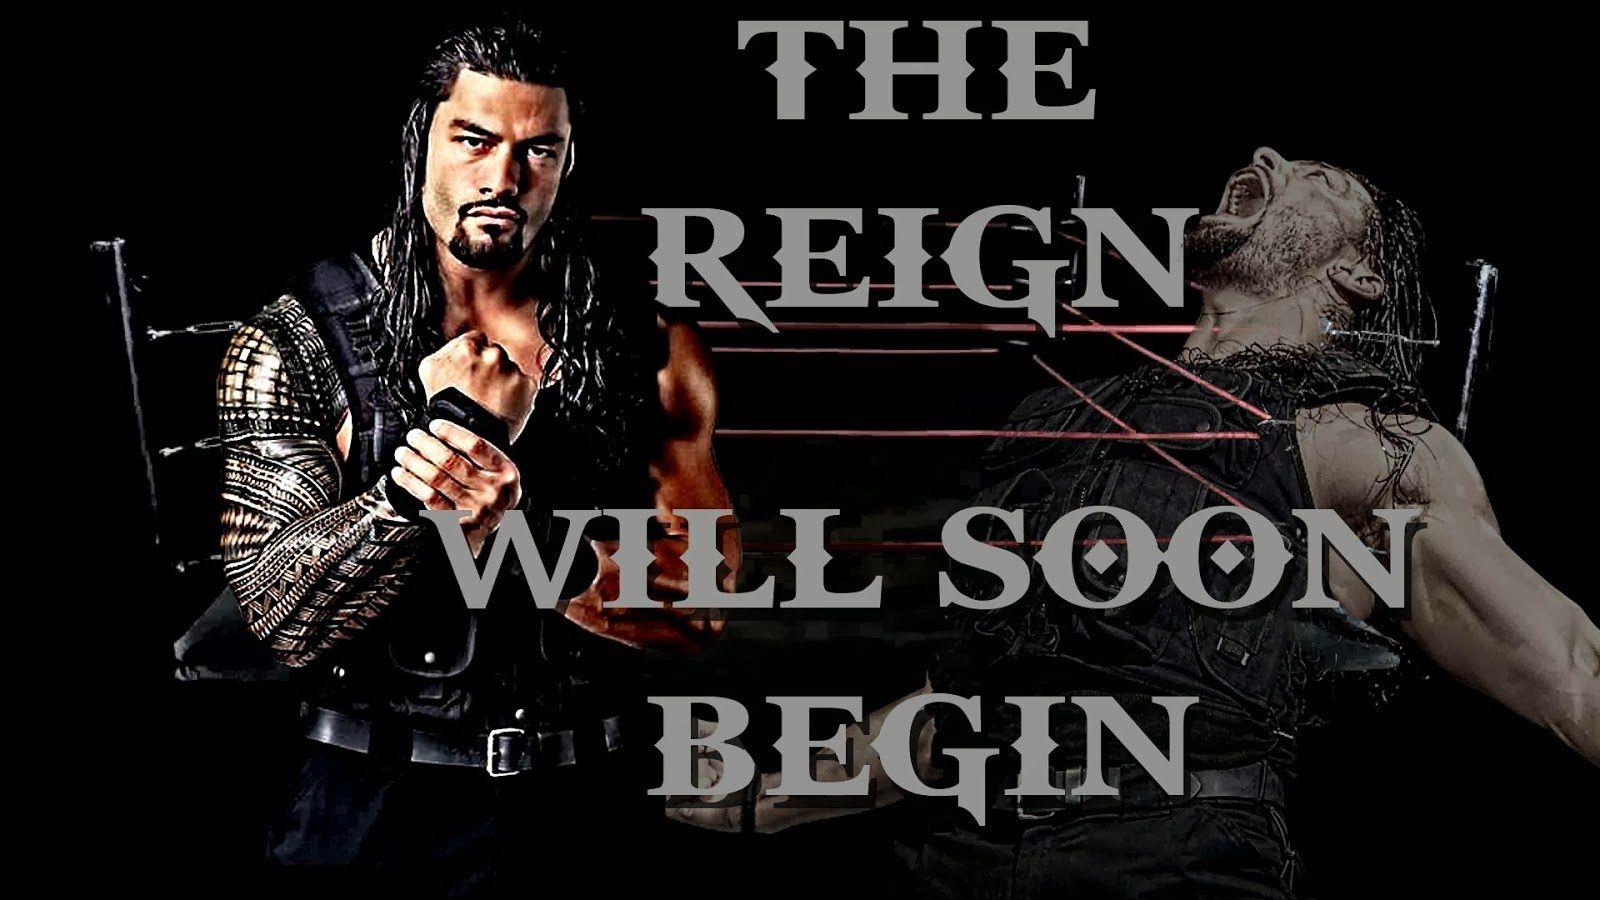 WWE Roman reigns spears of all time